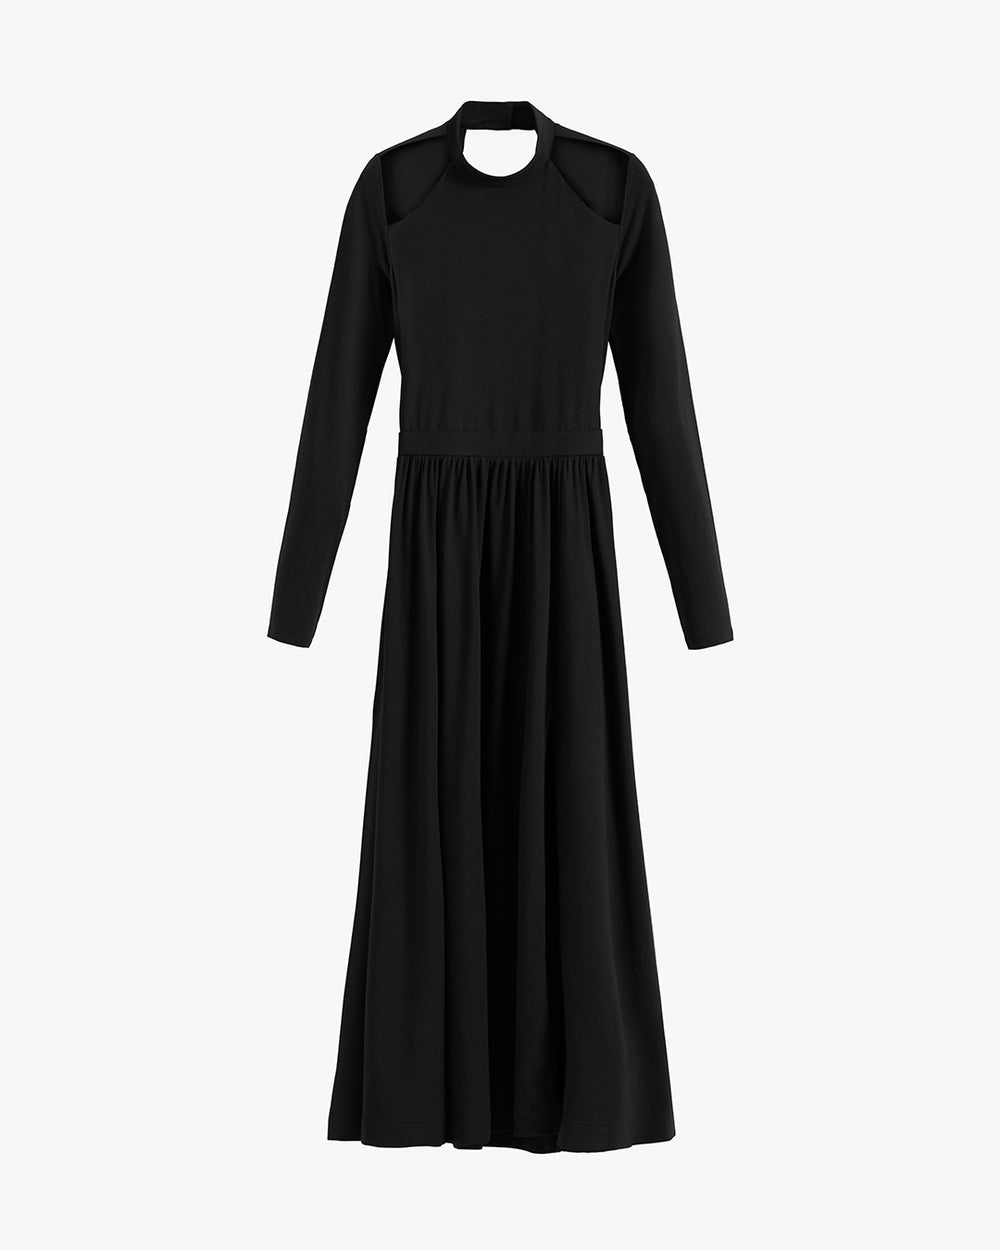 Long-sleeved dress with a crew neck and cinched waist.